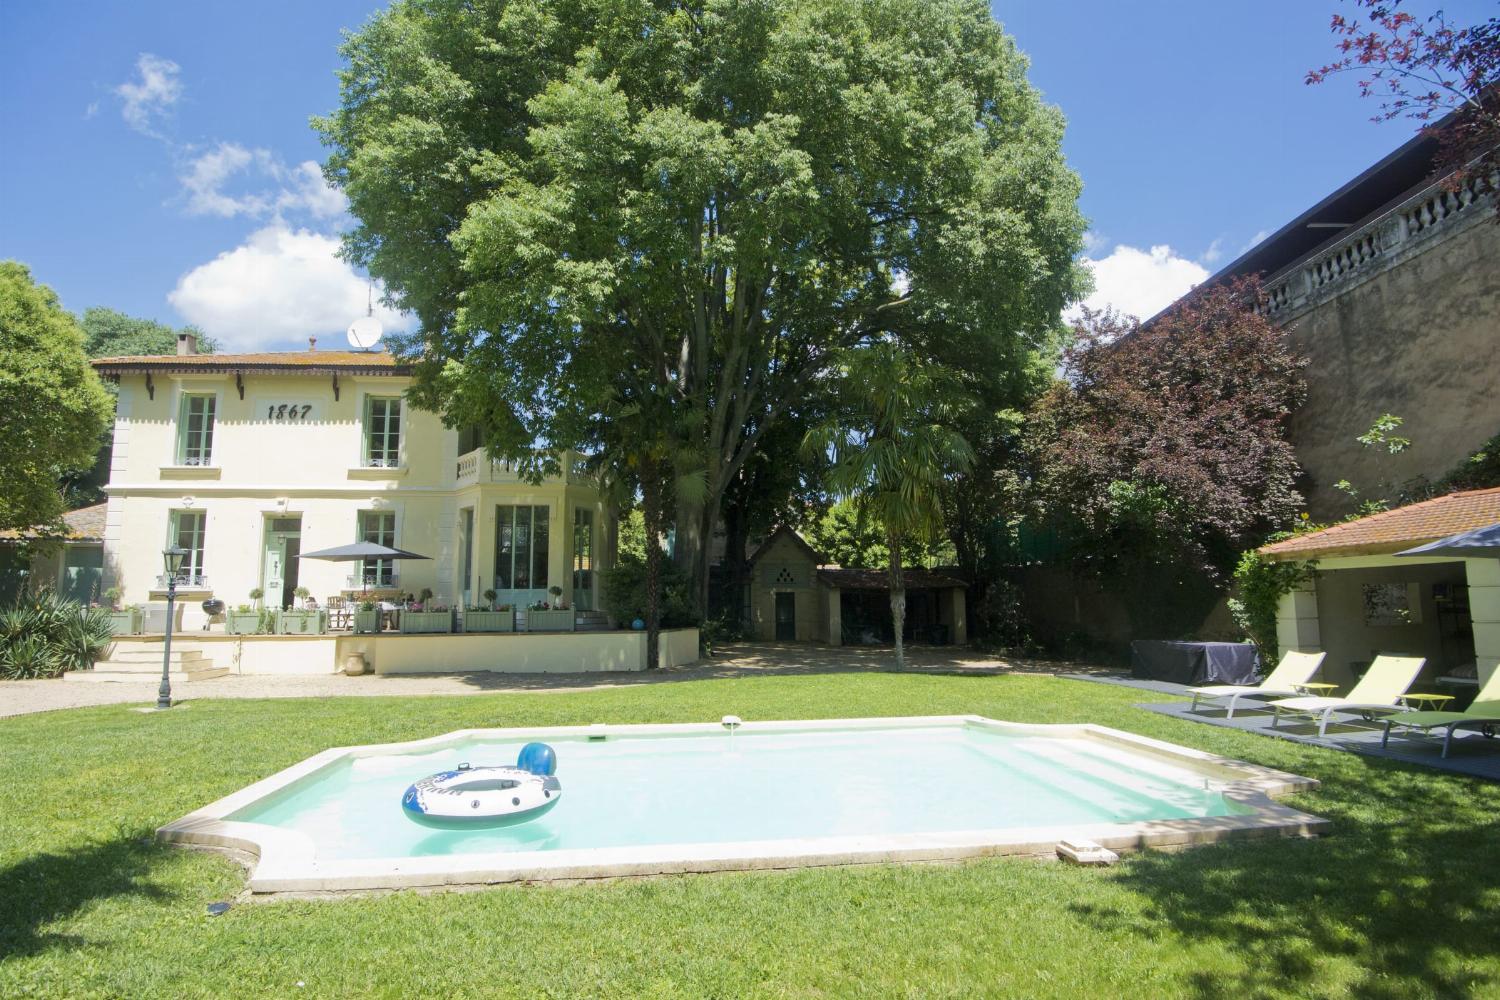 Rental home in South of France with private heated pool